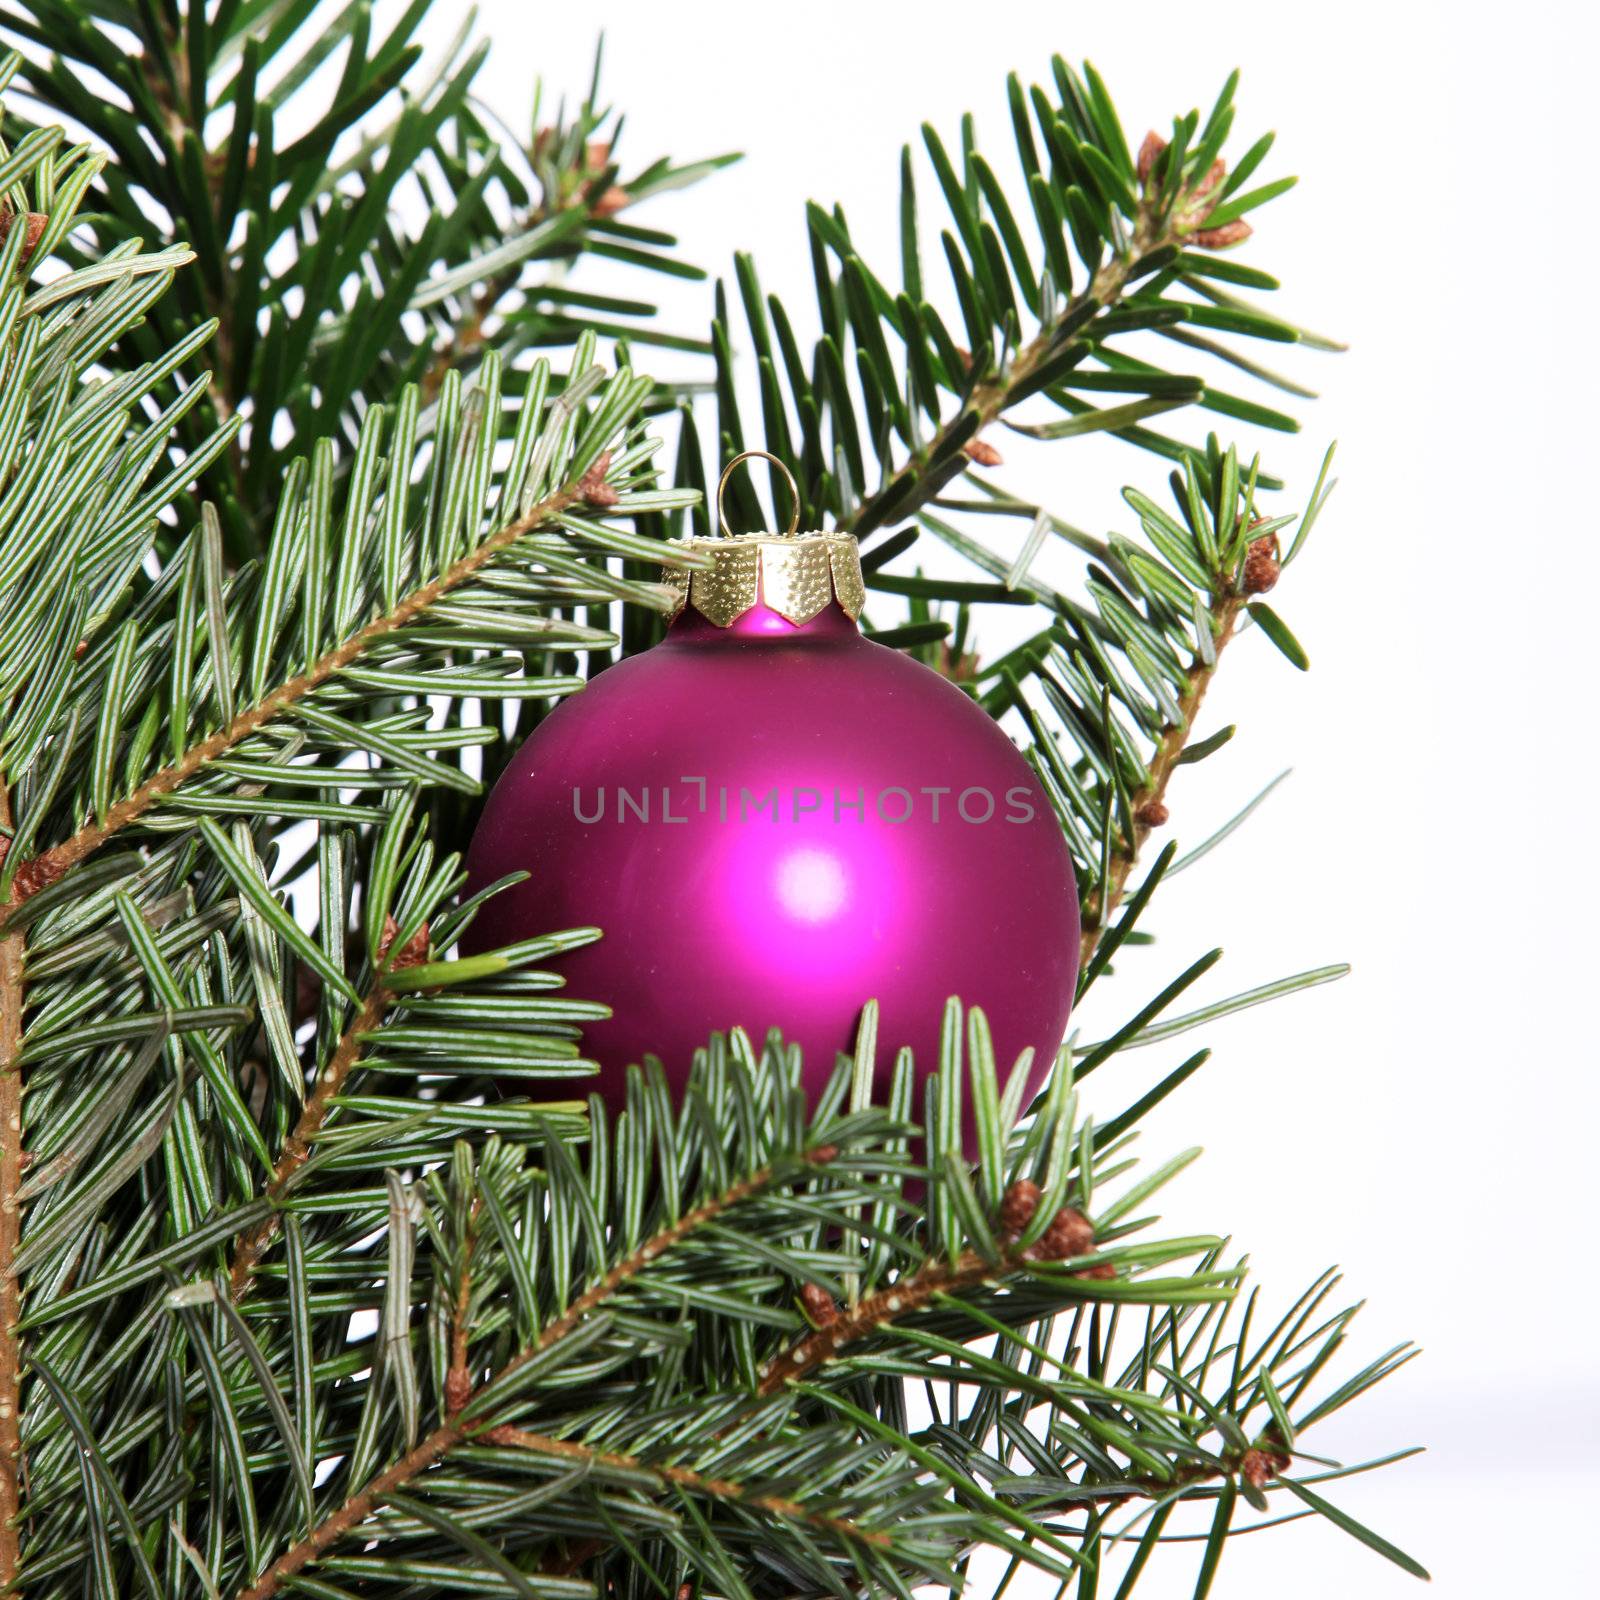 Single Christmas bauble in a tree by Farina6000